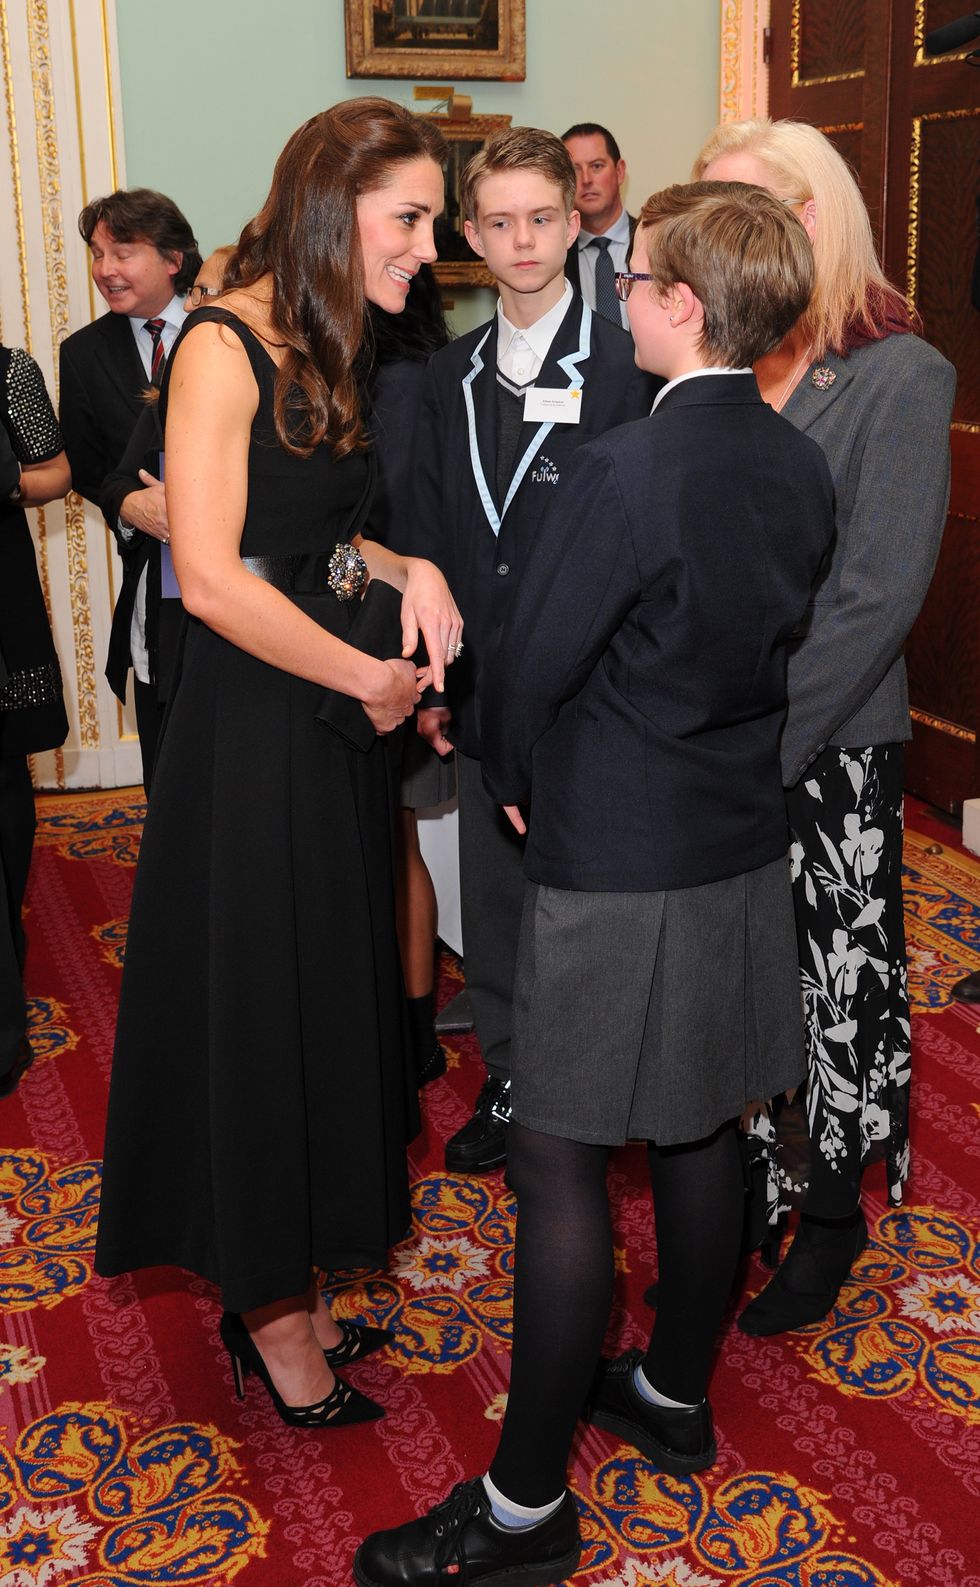 Kate Middleton, Duchess of Cambridge consoles mother of autistic boy